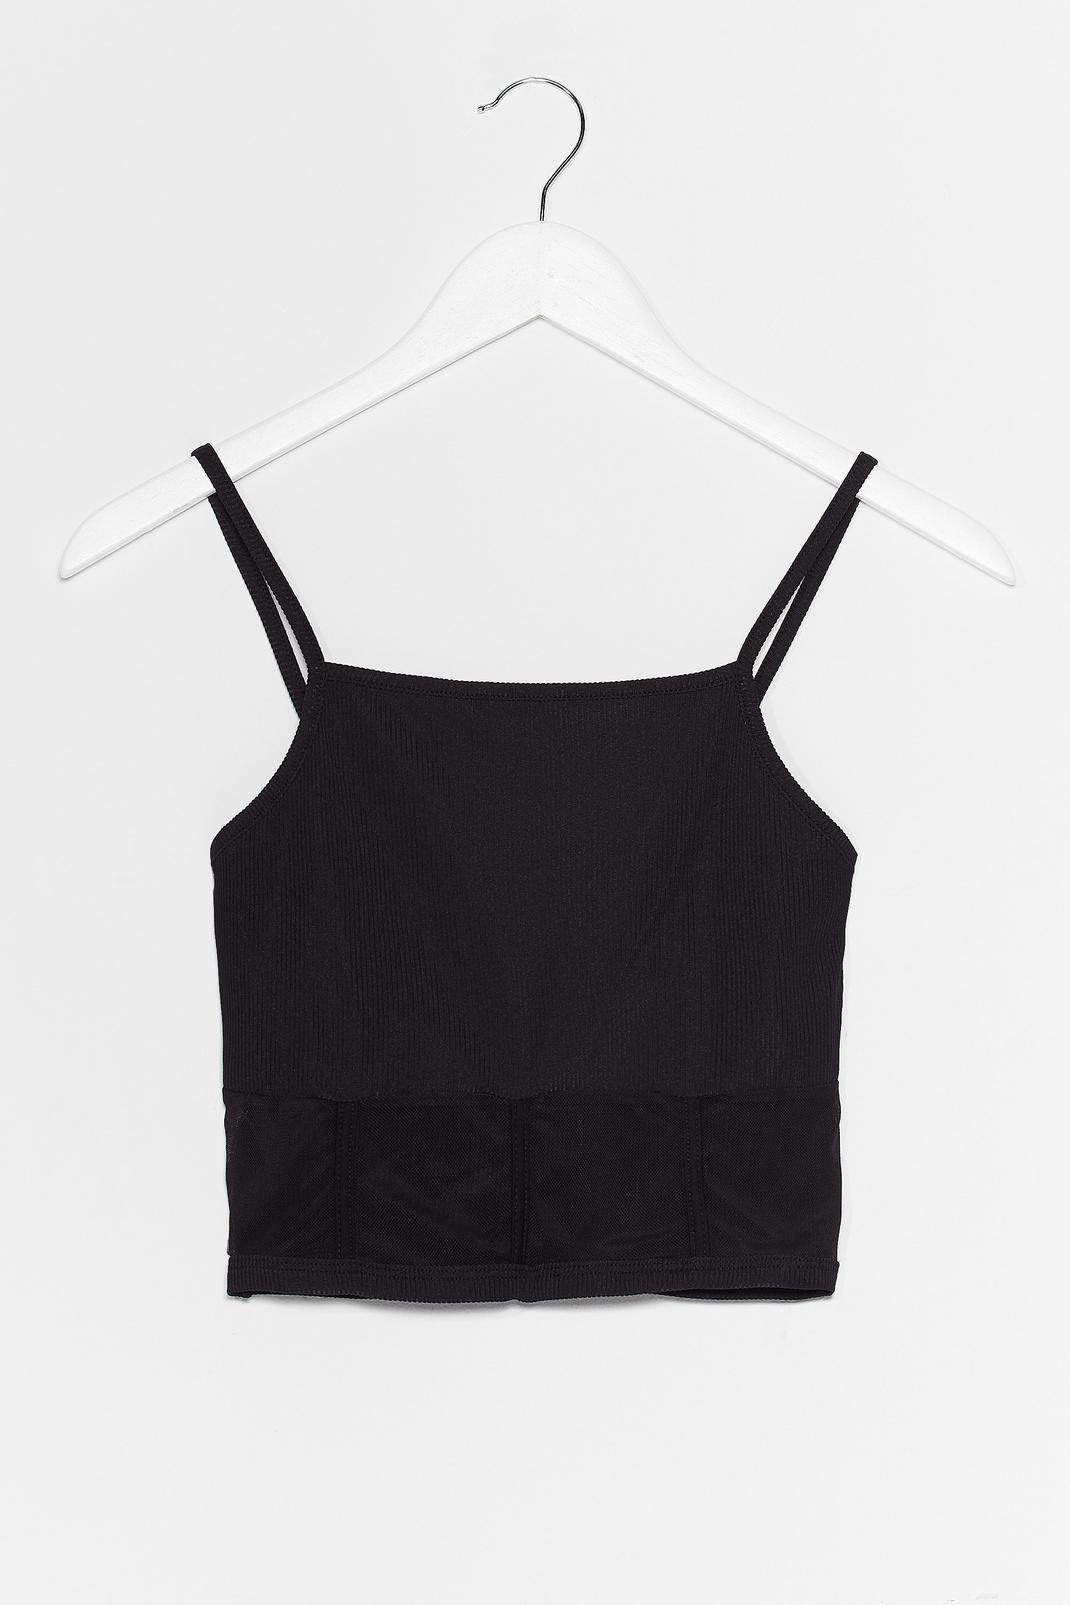 Of Corset We're Right Ribbed Crop Top image number 1